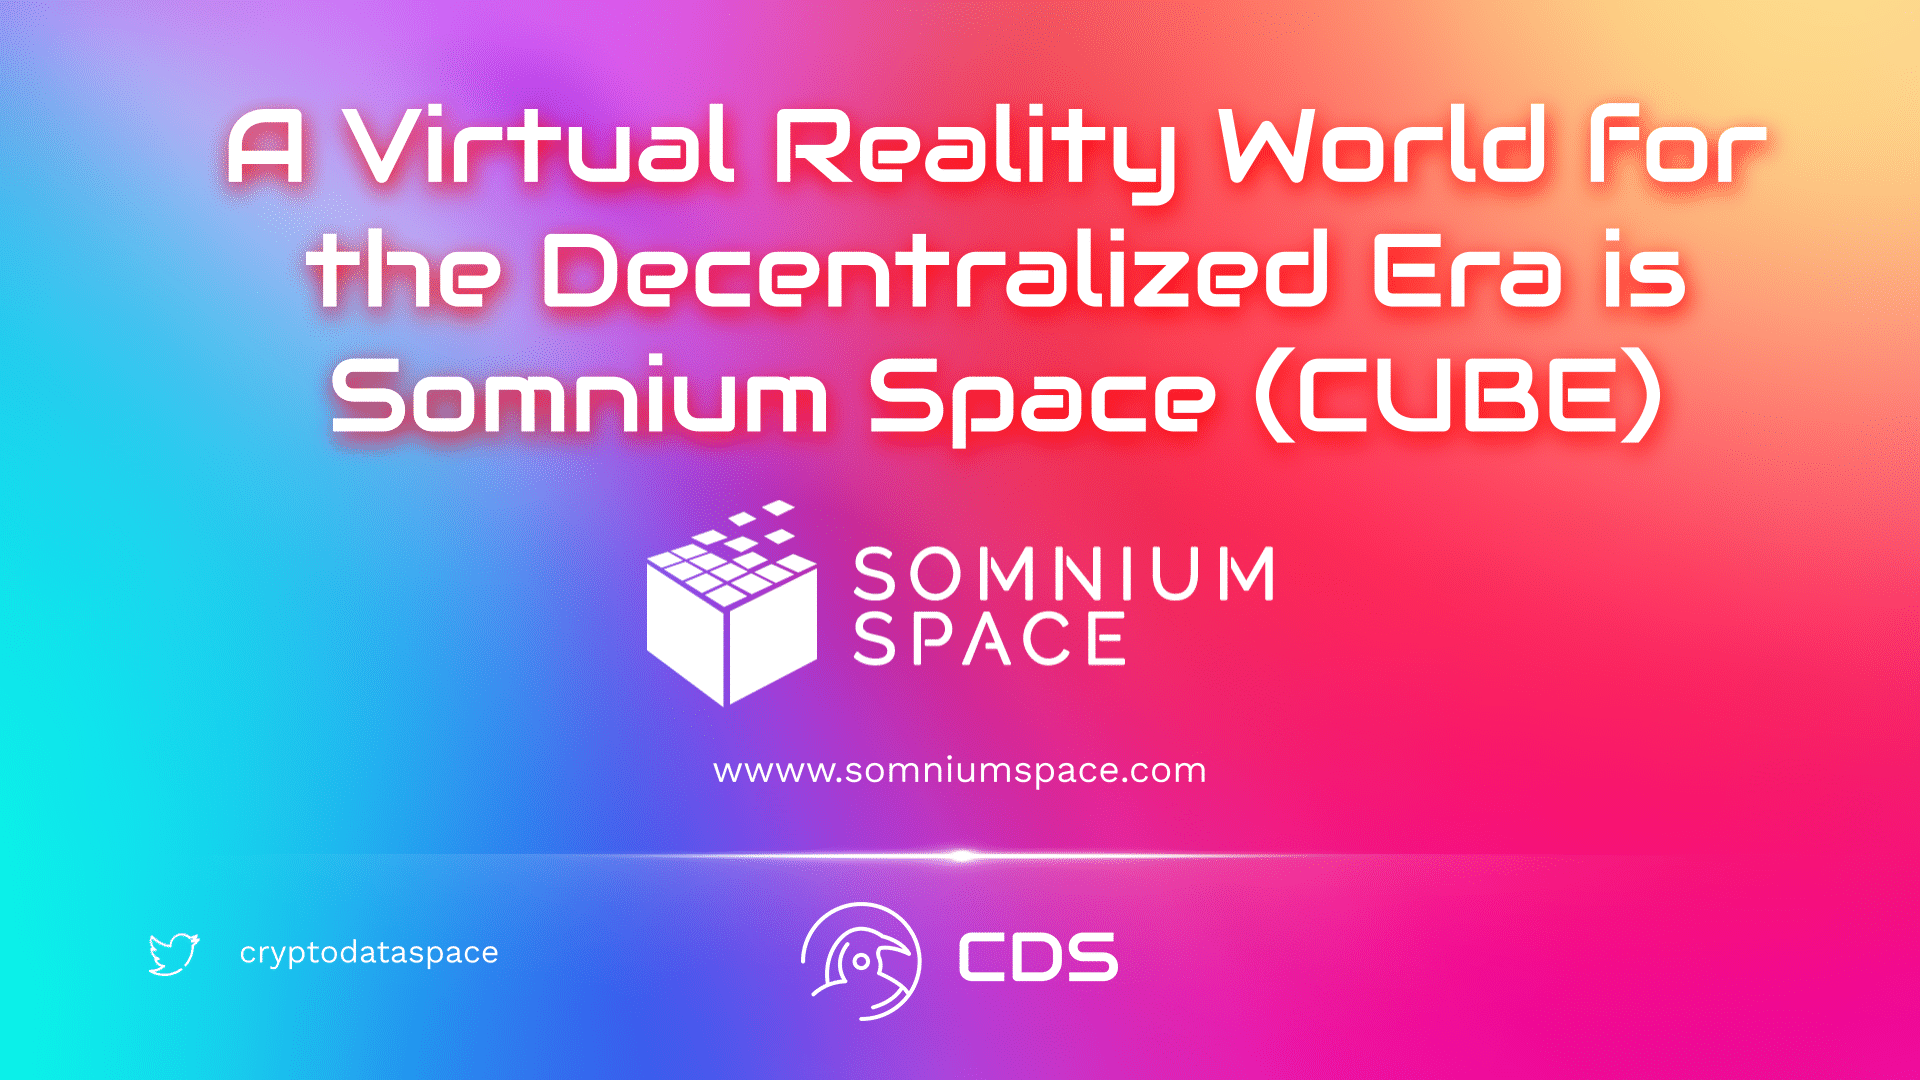 A Virtual Reality World for the Decentralized Era is Somnium Space (CUBE)